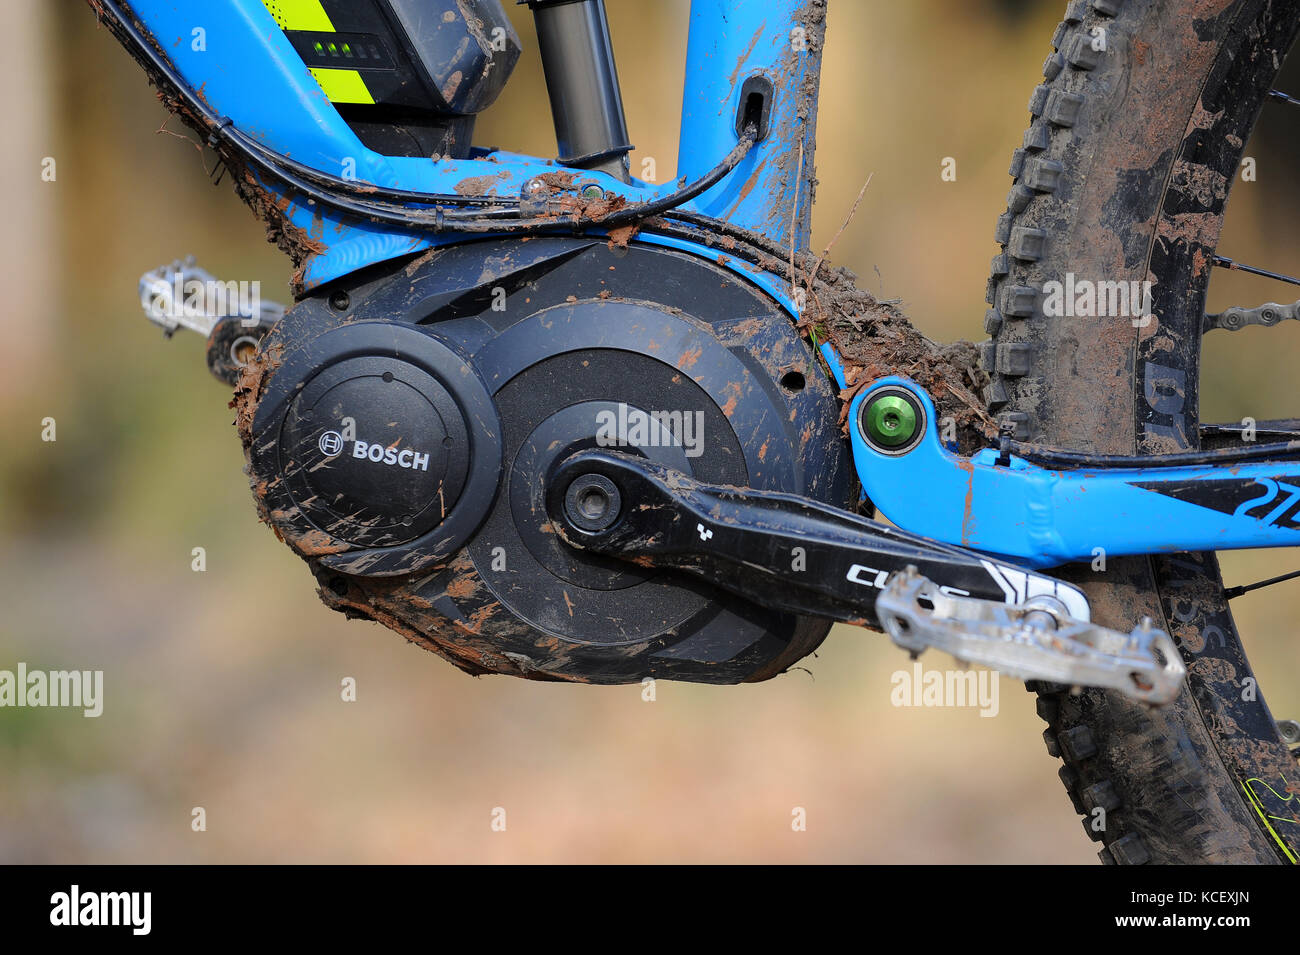 A pedal assist ebike mountain bike with a Bosch electric motor Stock Photo  - Alamy